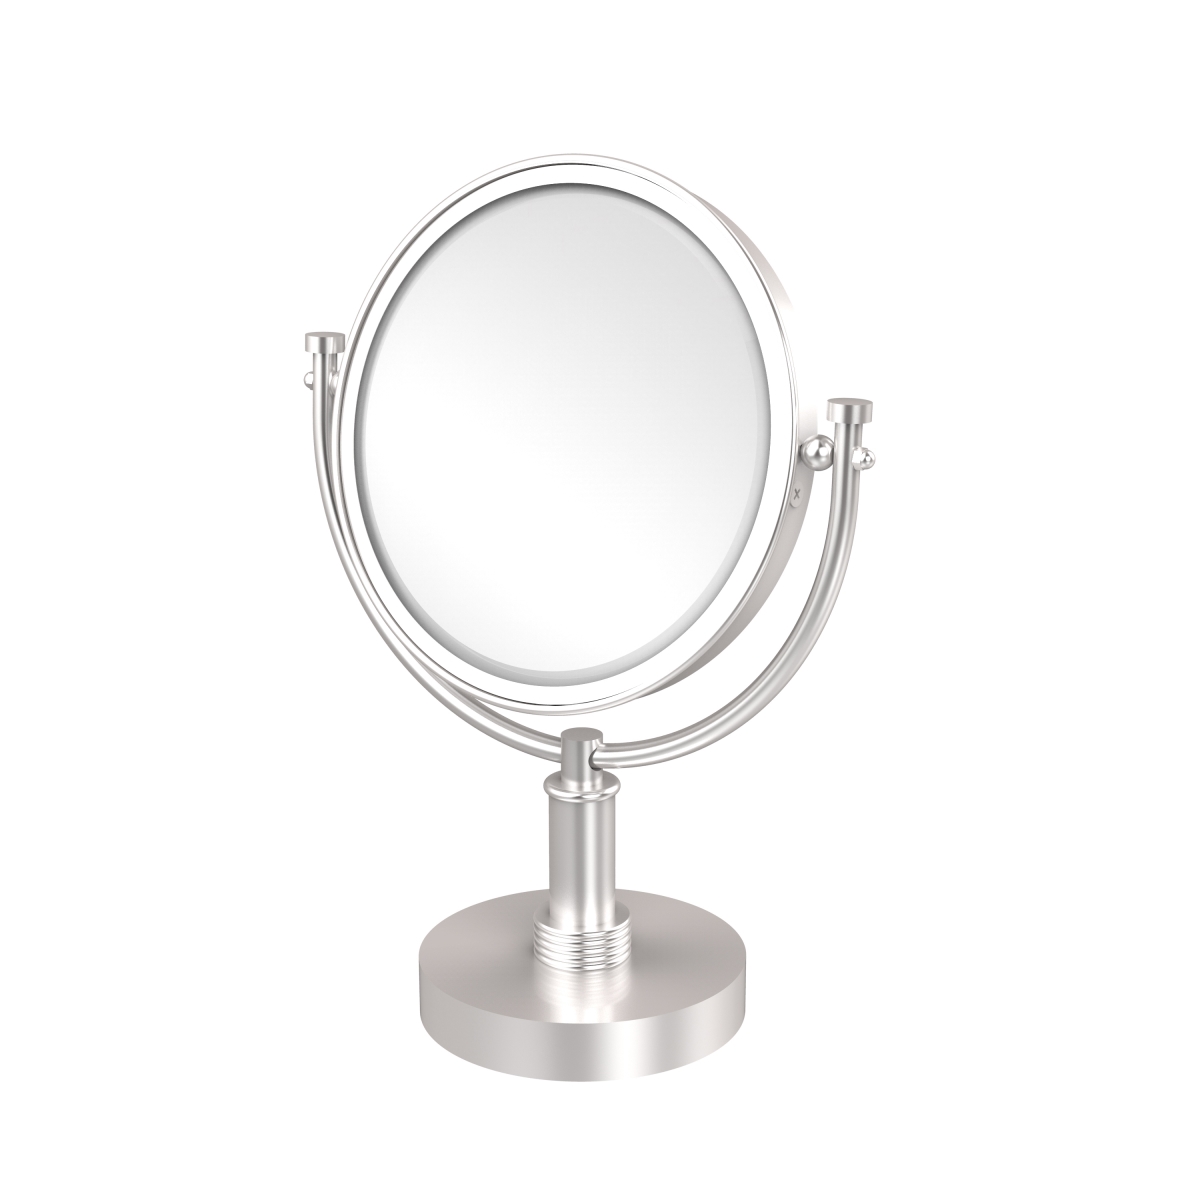 Picture of Allied Brass DM-4G-2X-SCH 8 in. Vanity Top Make-Up Mirror 2X Magnification, Satin Chrome - 15 x 8 x 8 in.